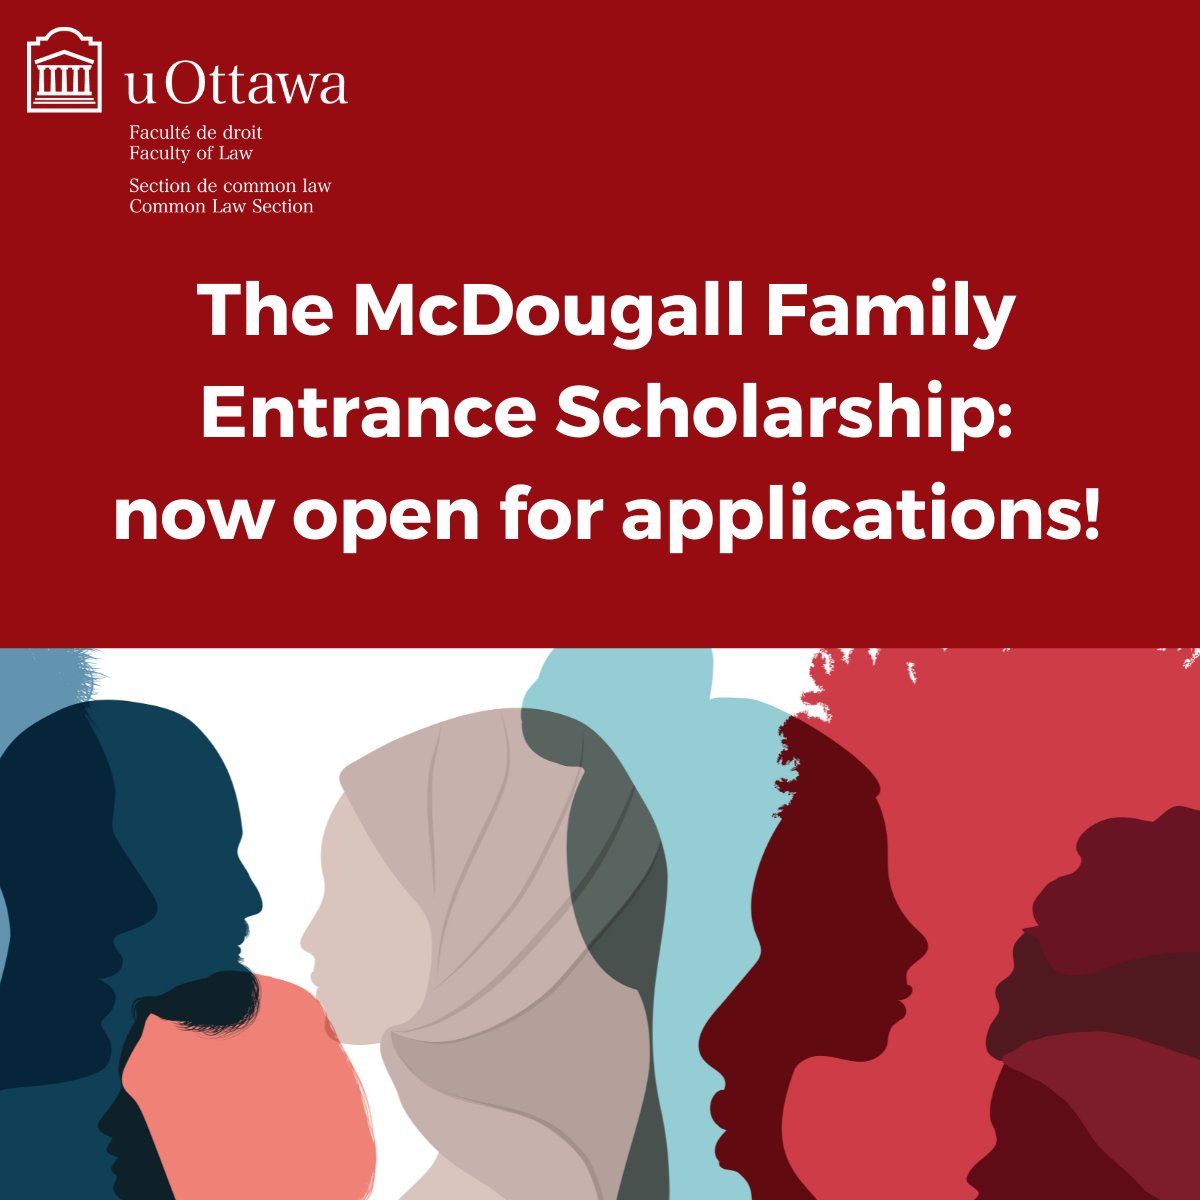 The Common Law Section is grateful for the support from the McDougall Family! Applications are open now until May 1! Learn more about Common Law Entrance Scholarships and how to apply here: uottawa.ca/faculty-law/co…